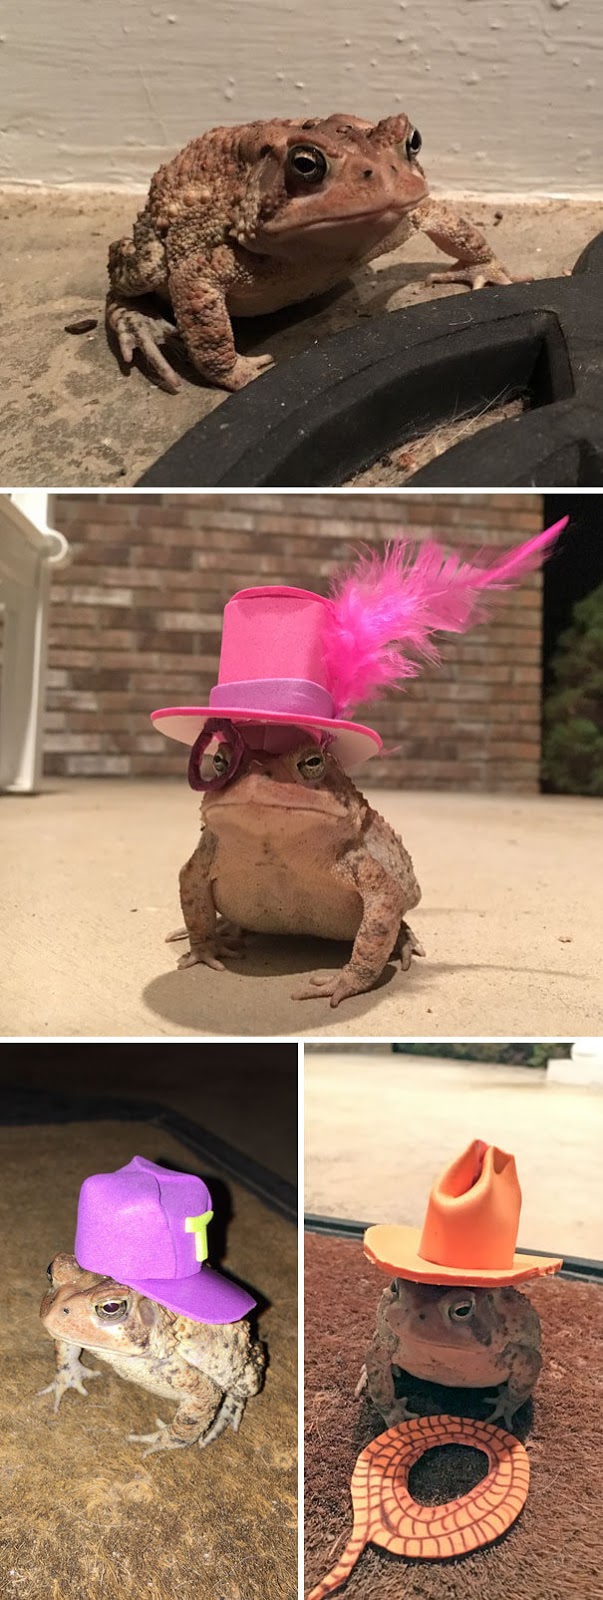 40 Heartwarming Pictures Of Animals - This Toad Kept Coming To My Porch, So I Started Making Him Tiny Hats